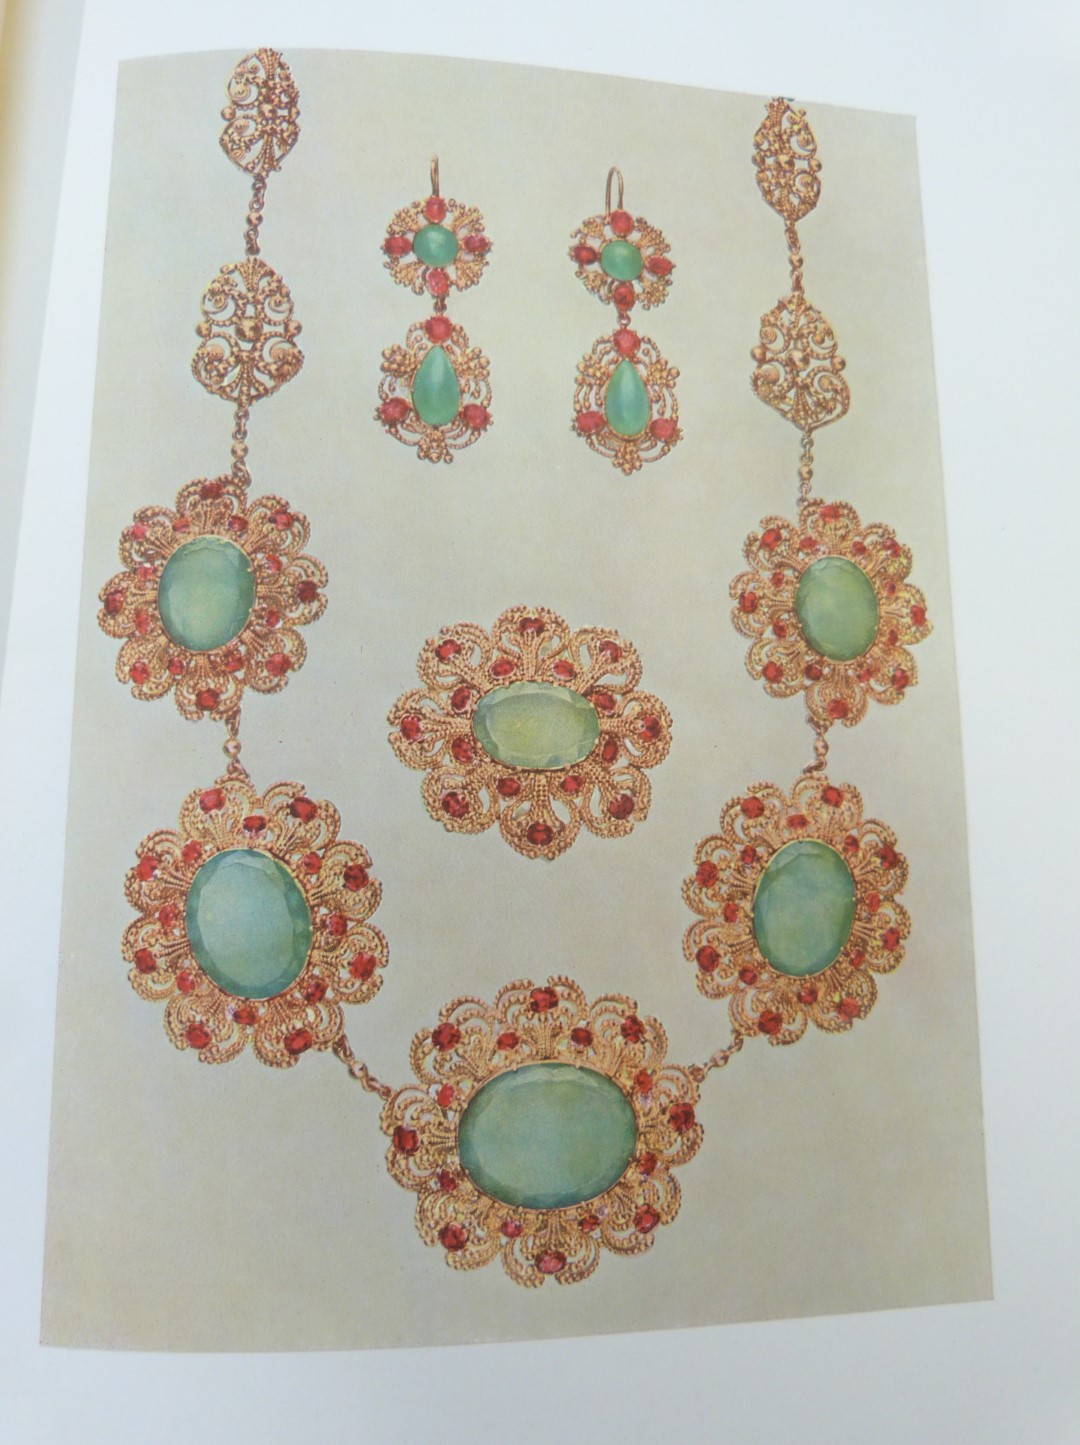 [Mappin & Webb] The Romance of The Jewel by Francis Stopford printed for Private Circulation 1920 - Image 6 of 7